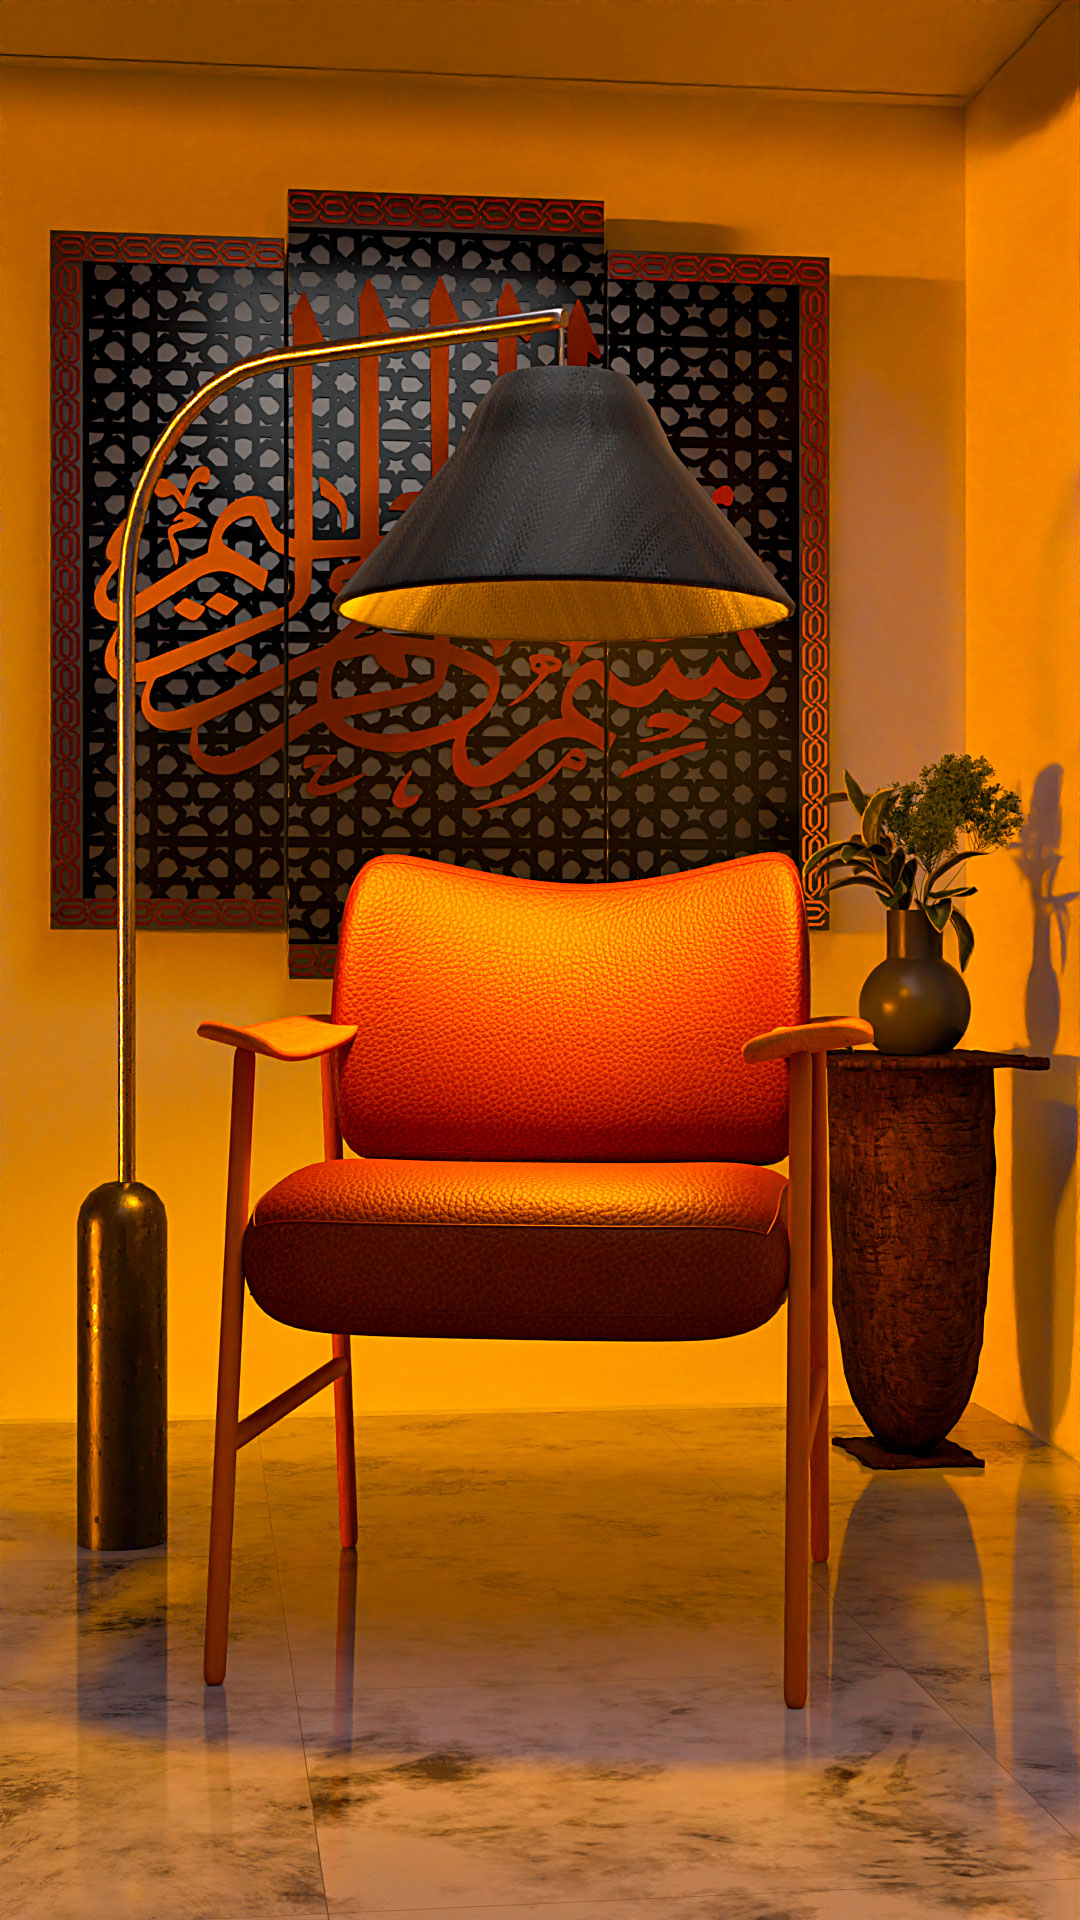 Chair and Lamp Scene with orange hues rendition image